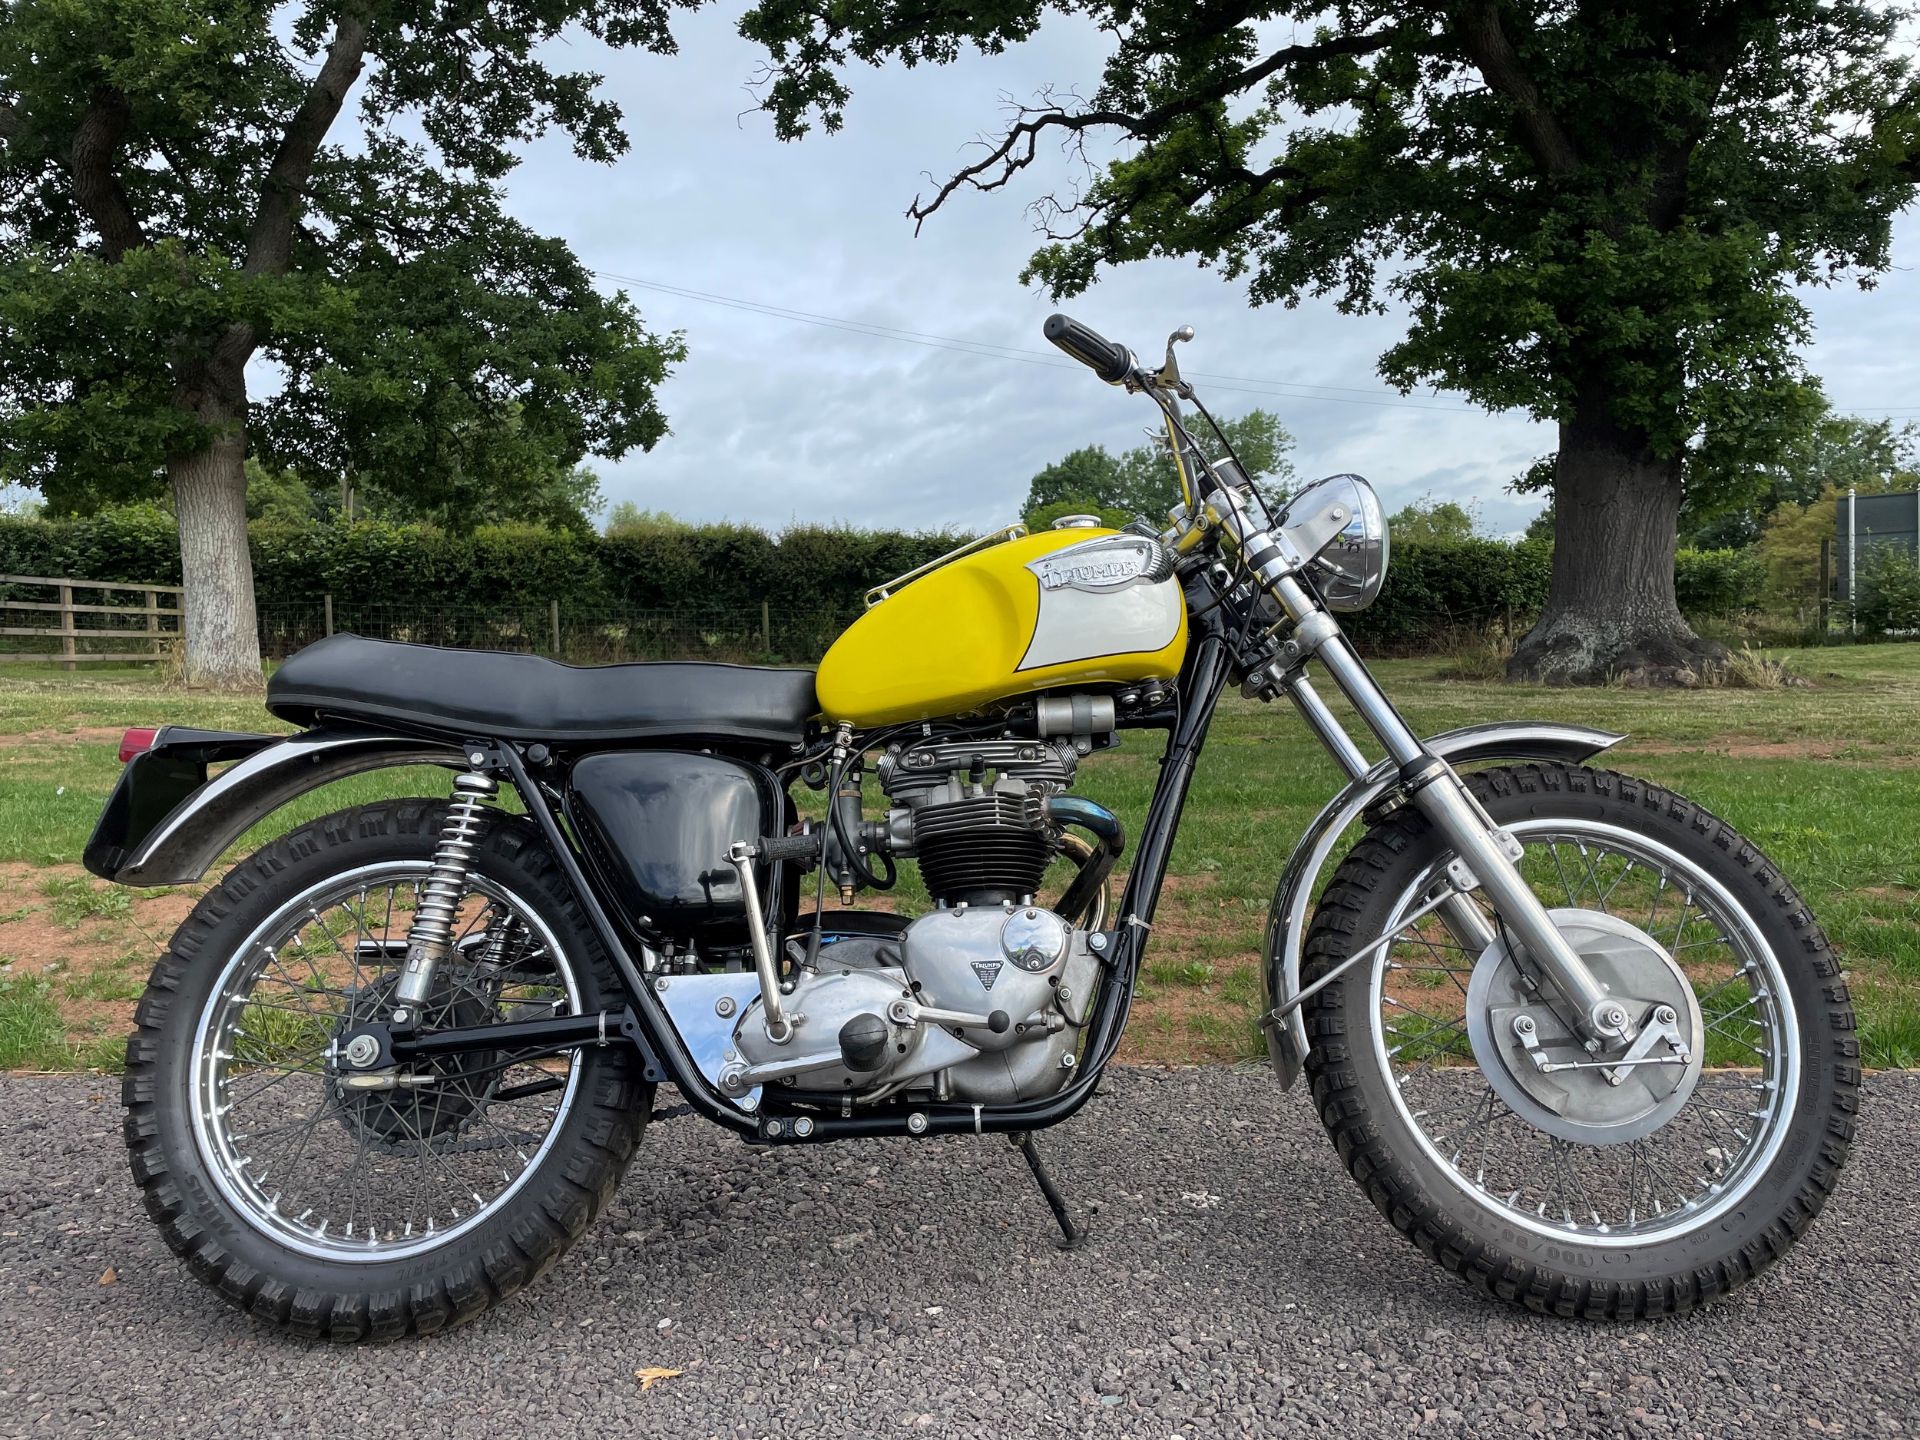 Triumph TR6 motorcycle. 650cc. 1963. Ceriani forks, TLS brake, top end rebuild with new STD